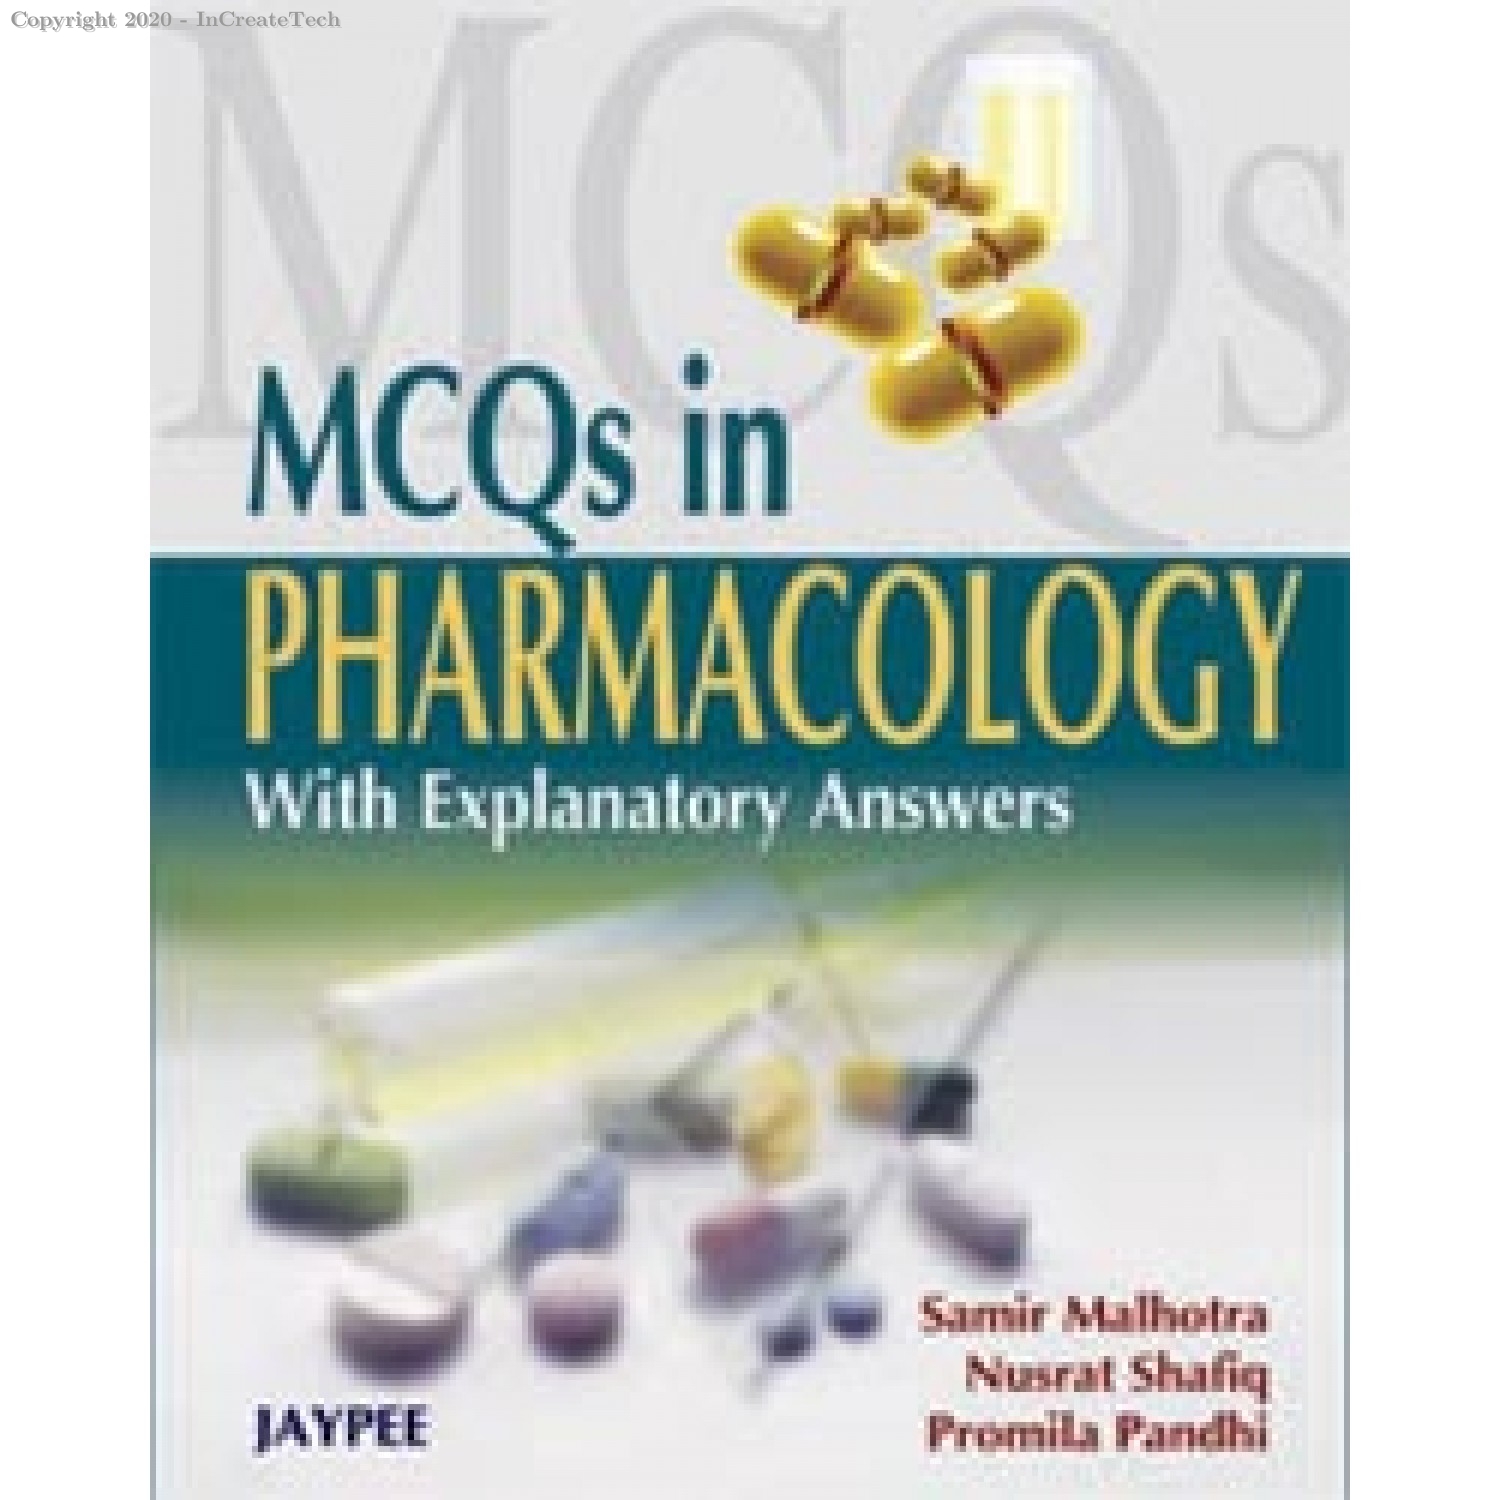 mcqS in pharmacology